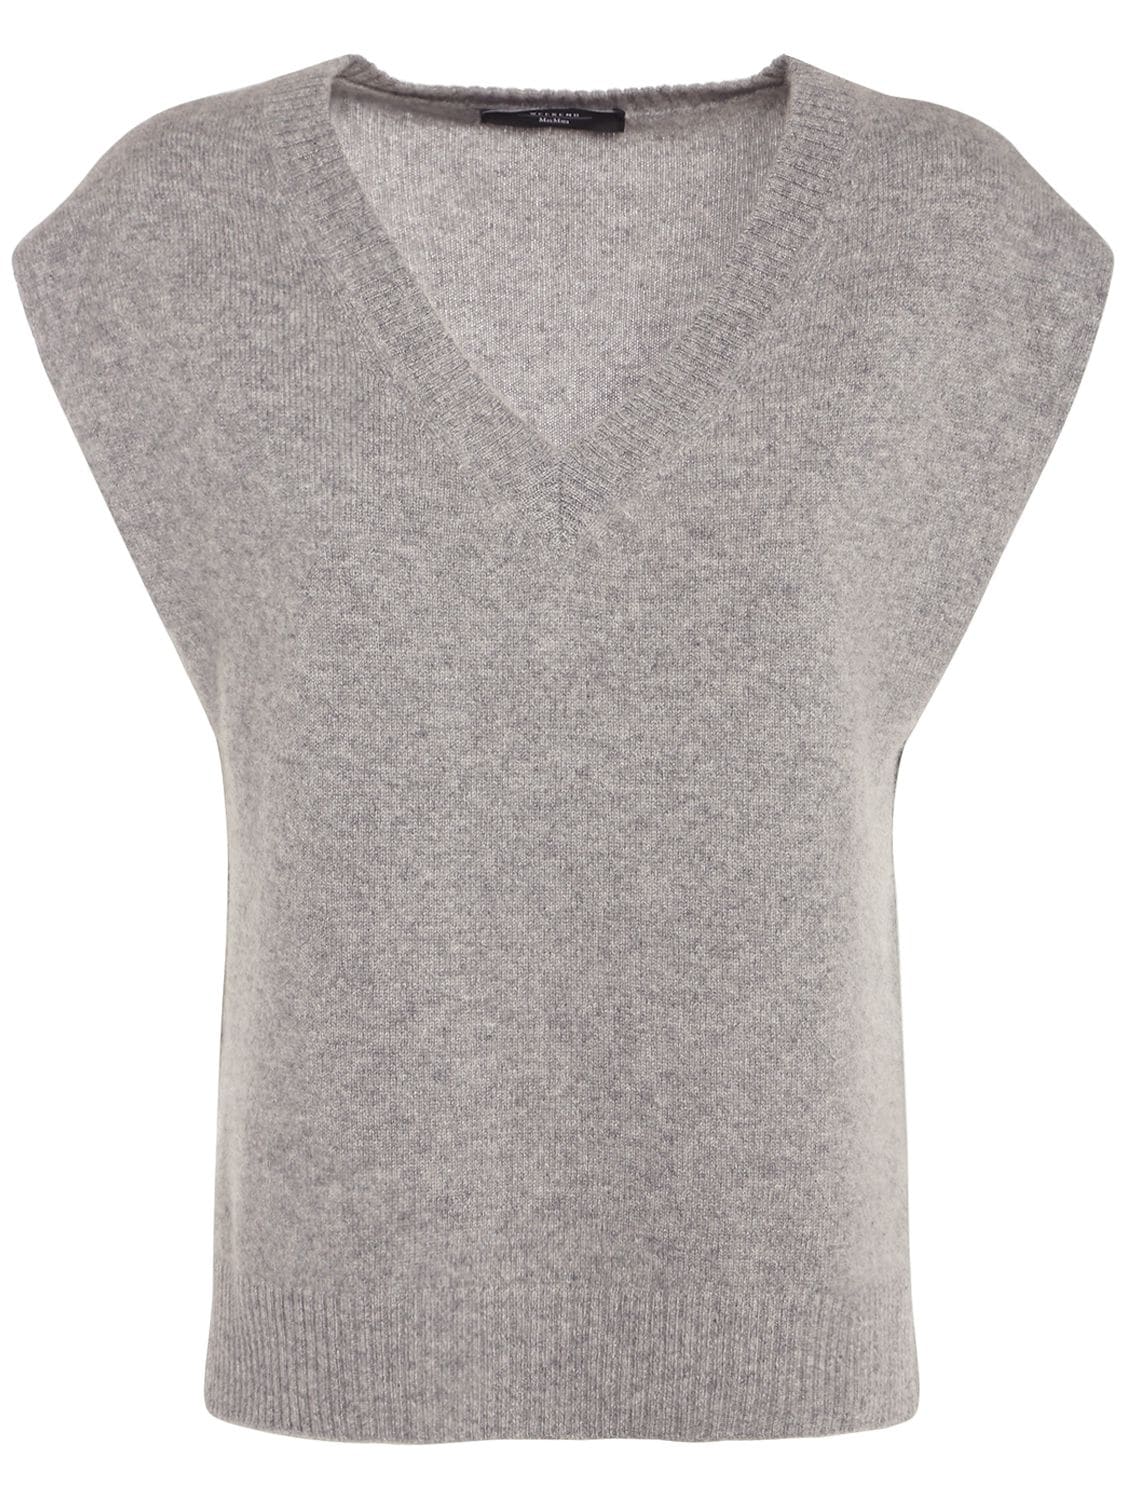 WEEKEND MAX MARA Vests On Sale, Up To 70% Off | ModeSens